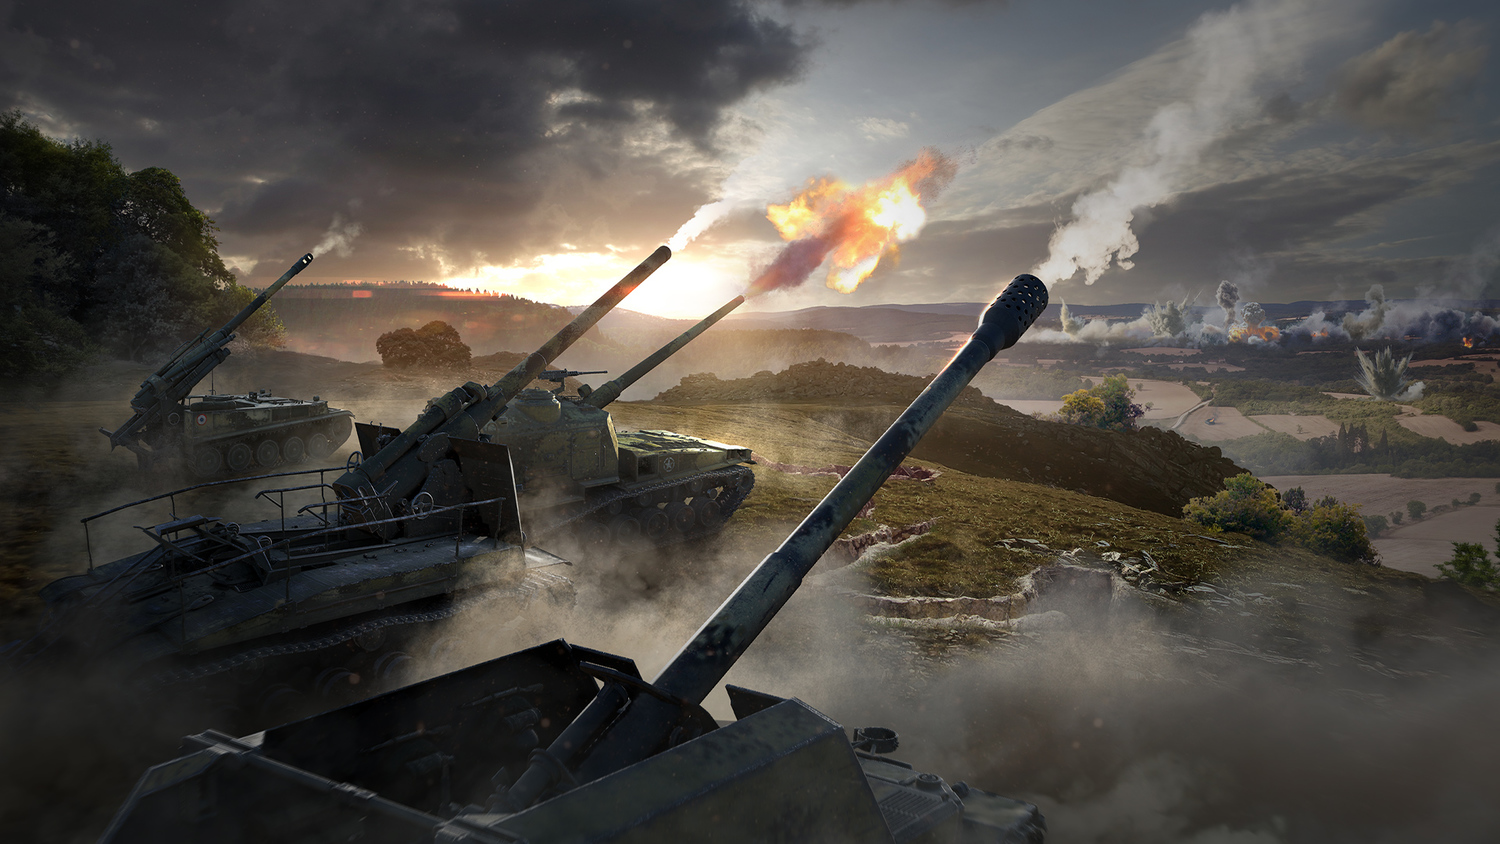 Players will have 3 new tactical options to counter self-propelled guns.Picture: Zhanyou.com/provided